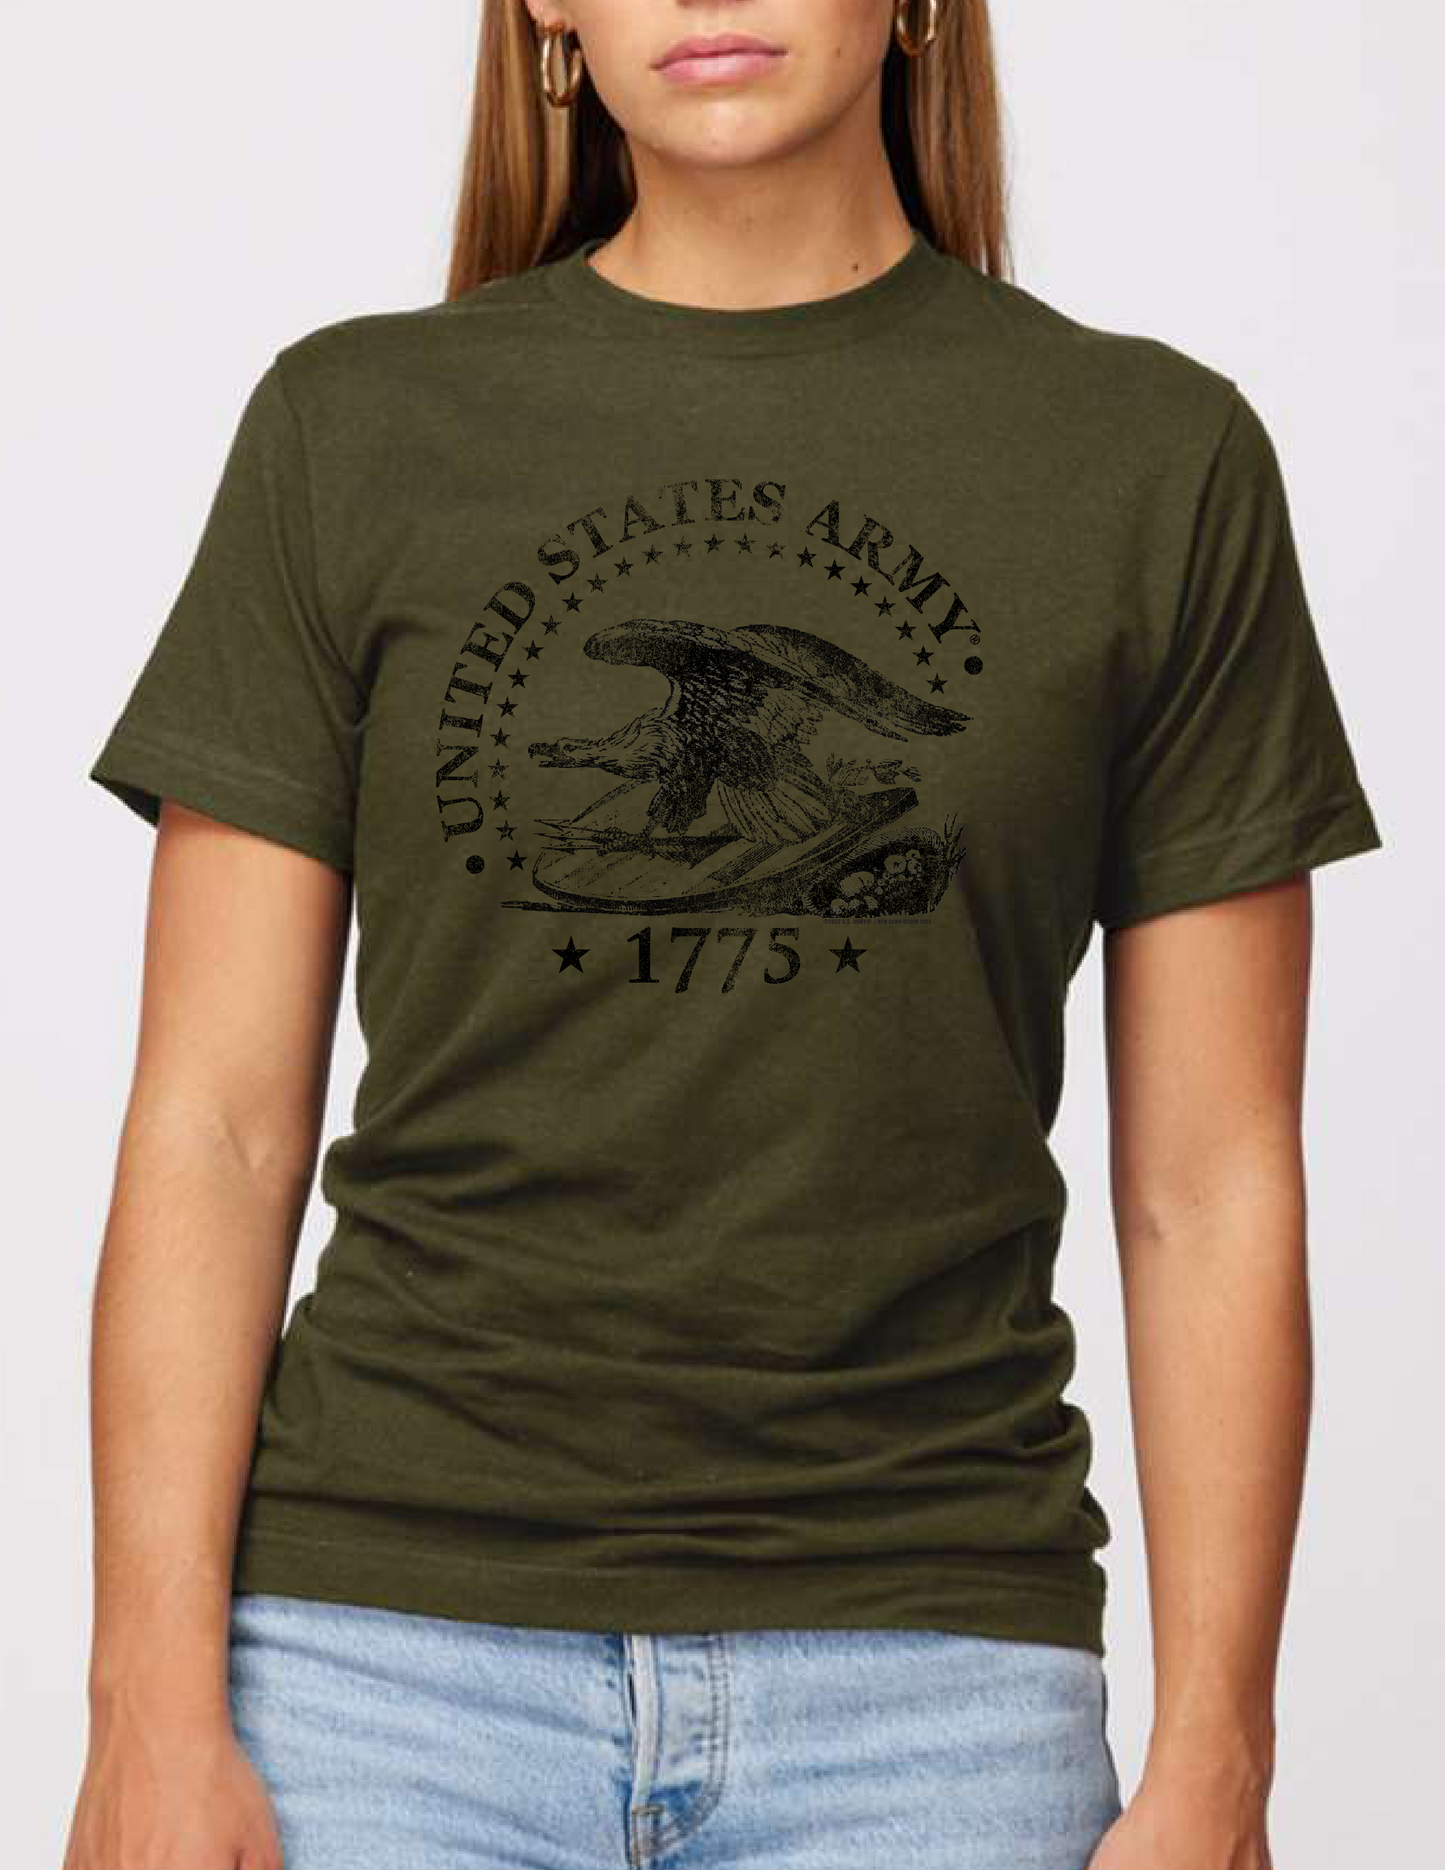 U.S. Army Est. 1775 Military Green Historical Tee